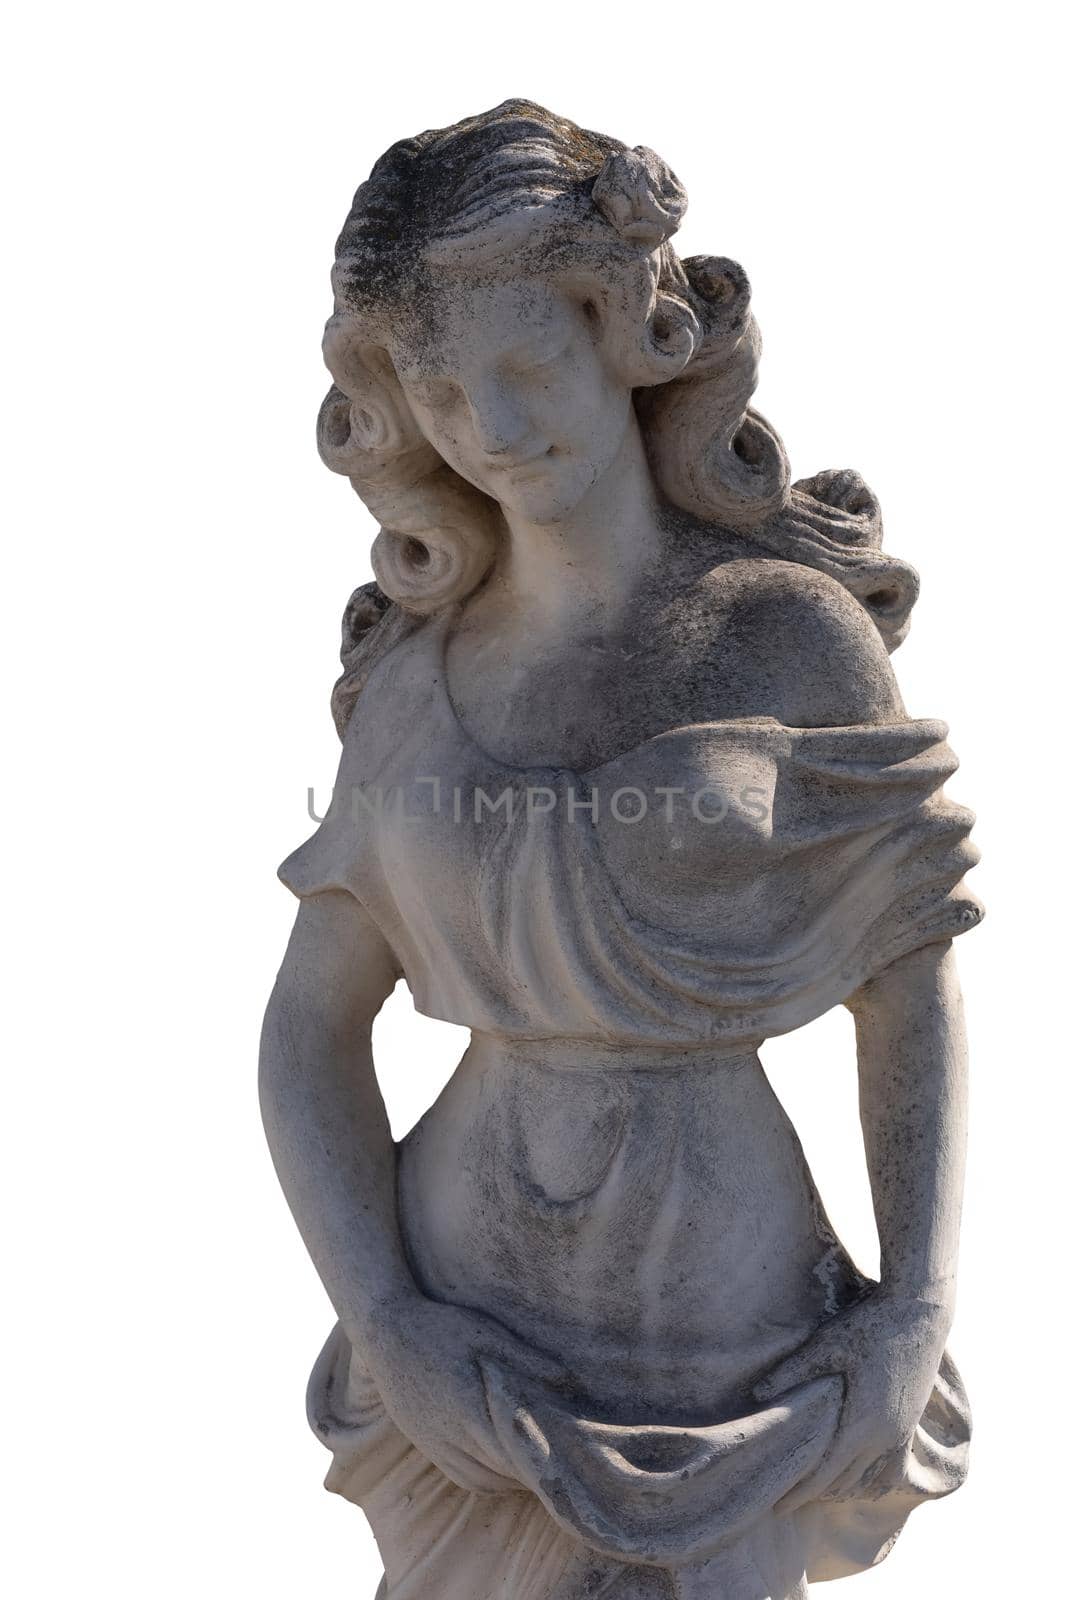 Stone sculpture of woman holding her dress on white background. art and classical style romantic figurative stone sculpture.